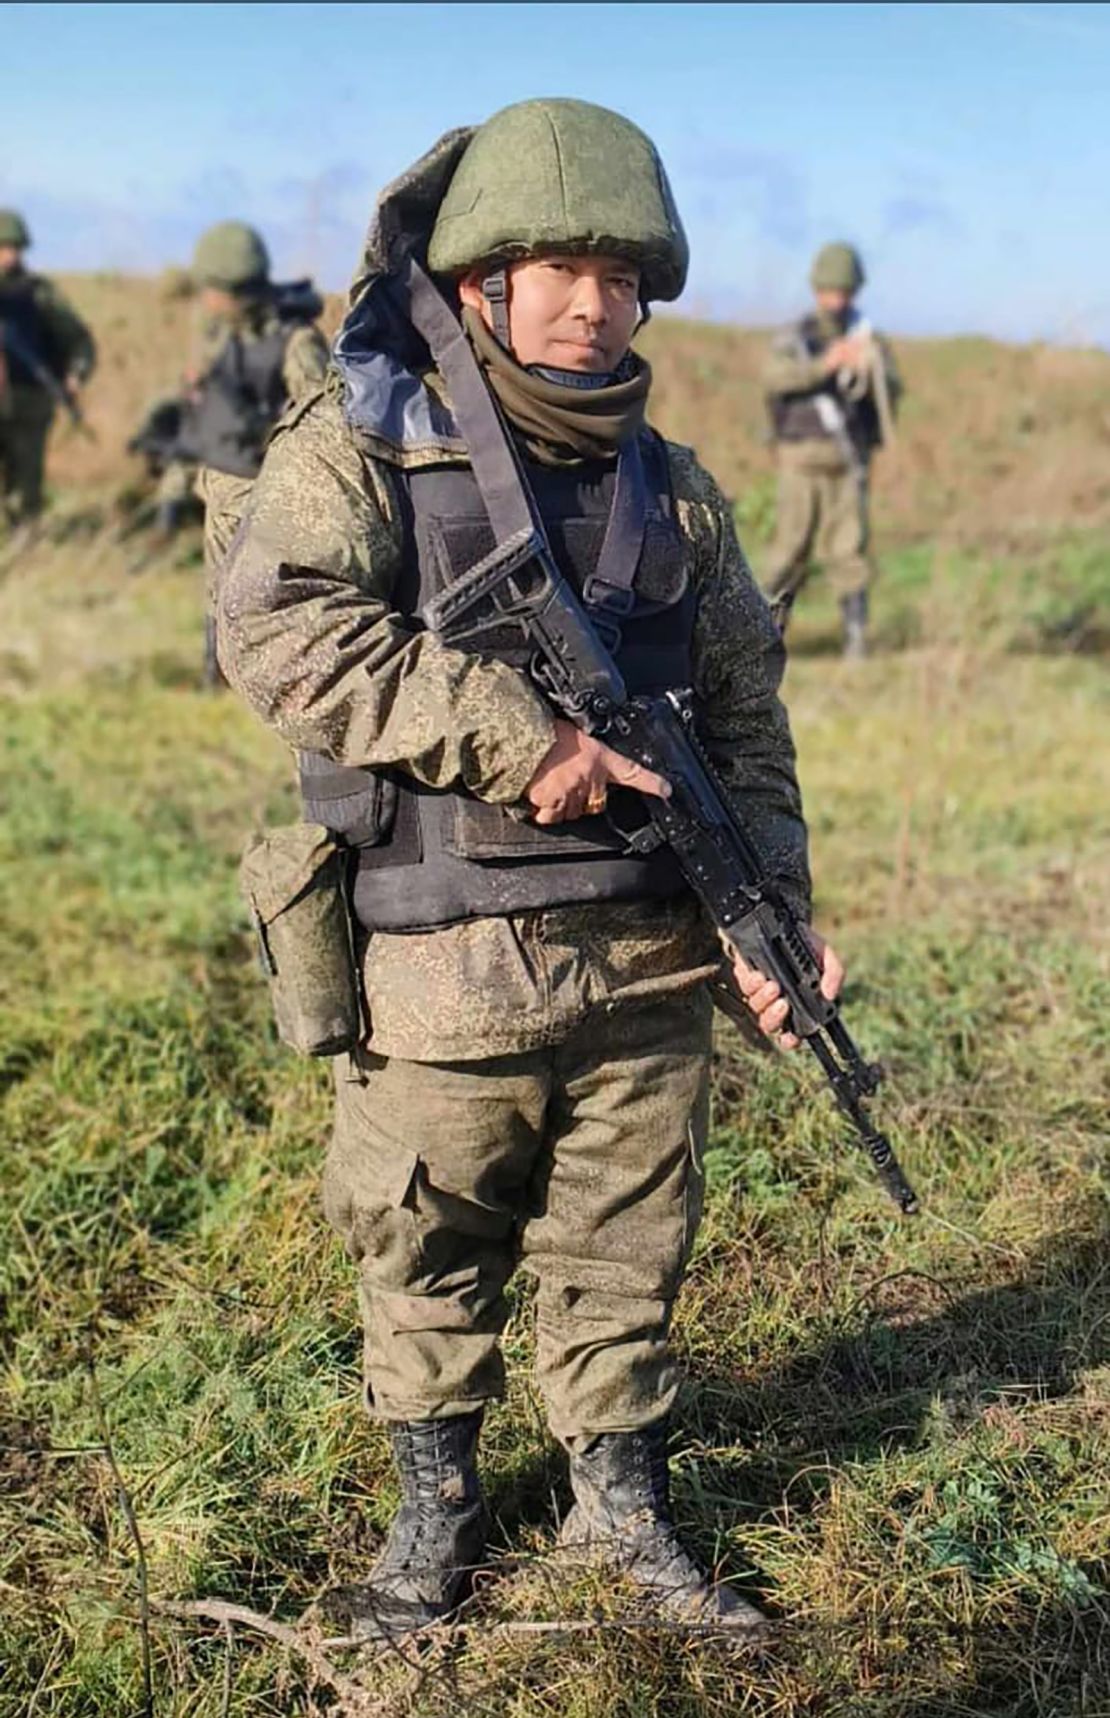 A photo shows Shukra Tamang, a retired Nepali army soldier, training in Russia. His fate is unclear.